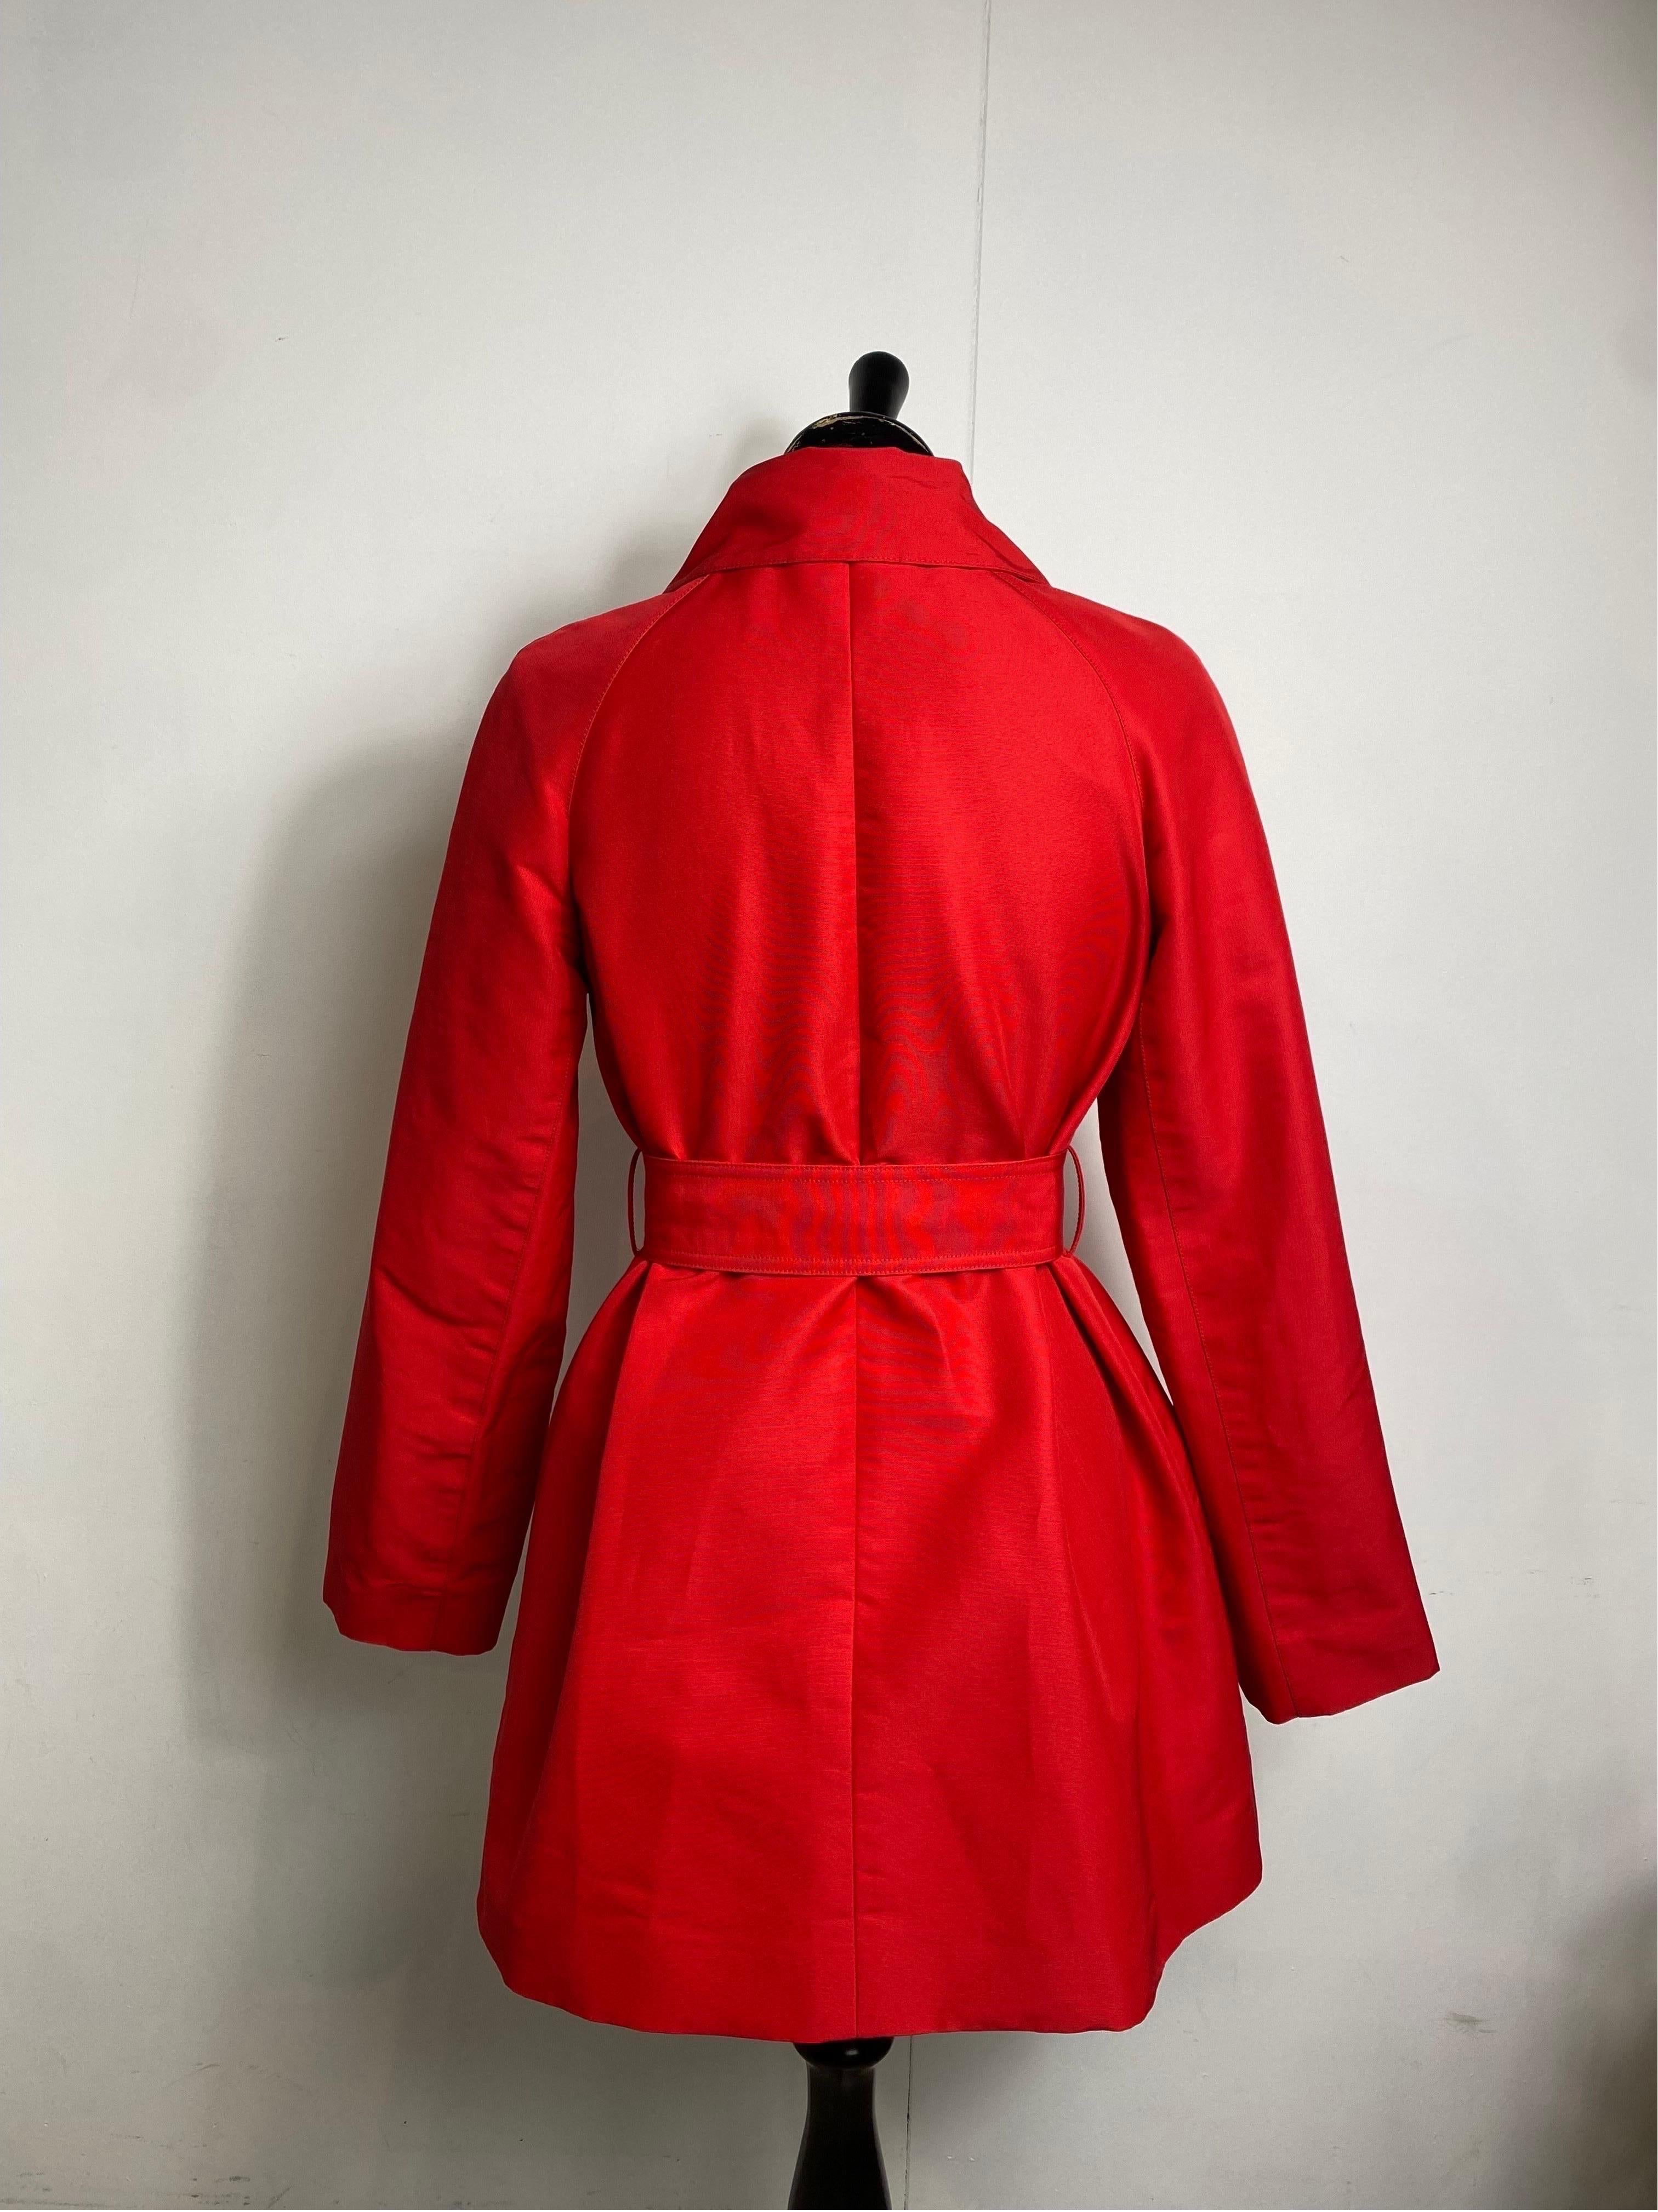 Women's or Men's Dolce and Gabbana Red trench coat